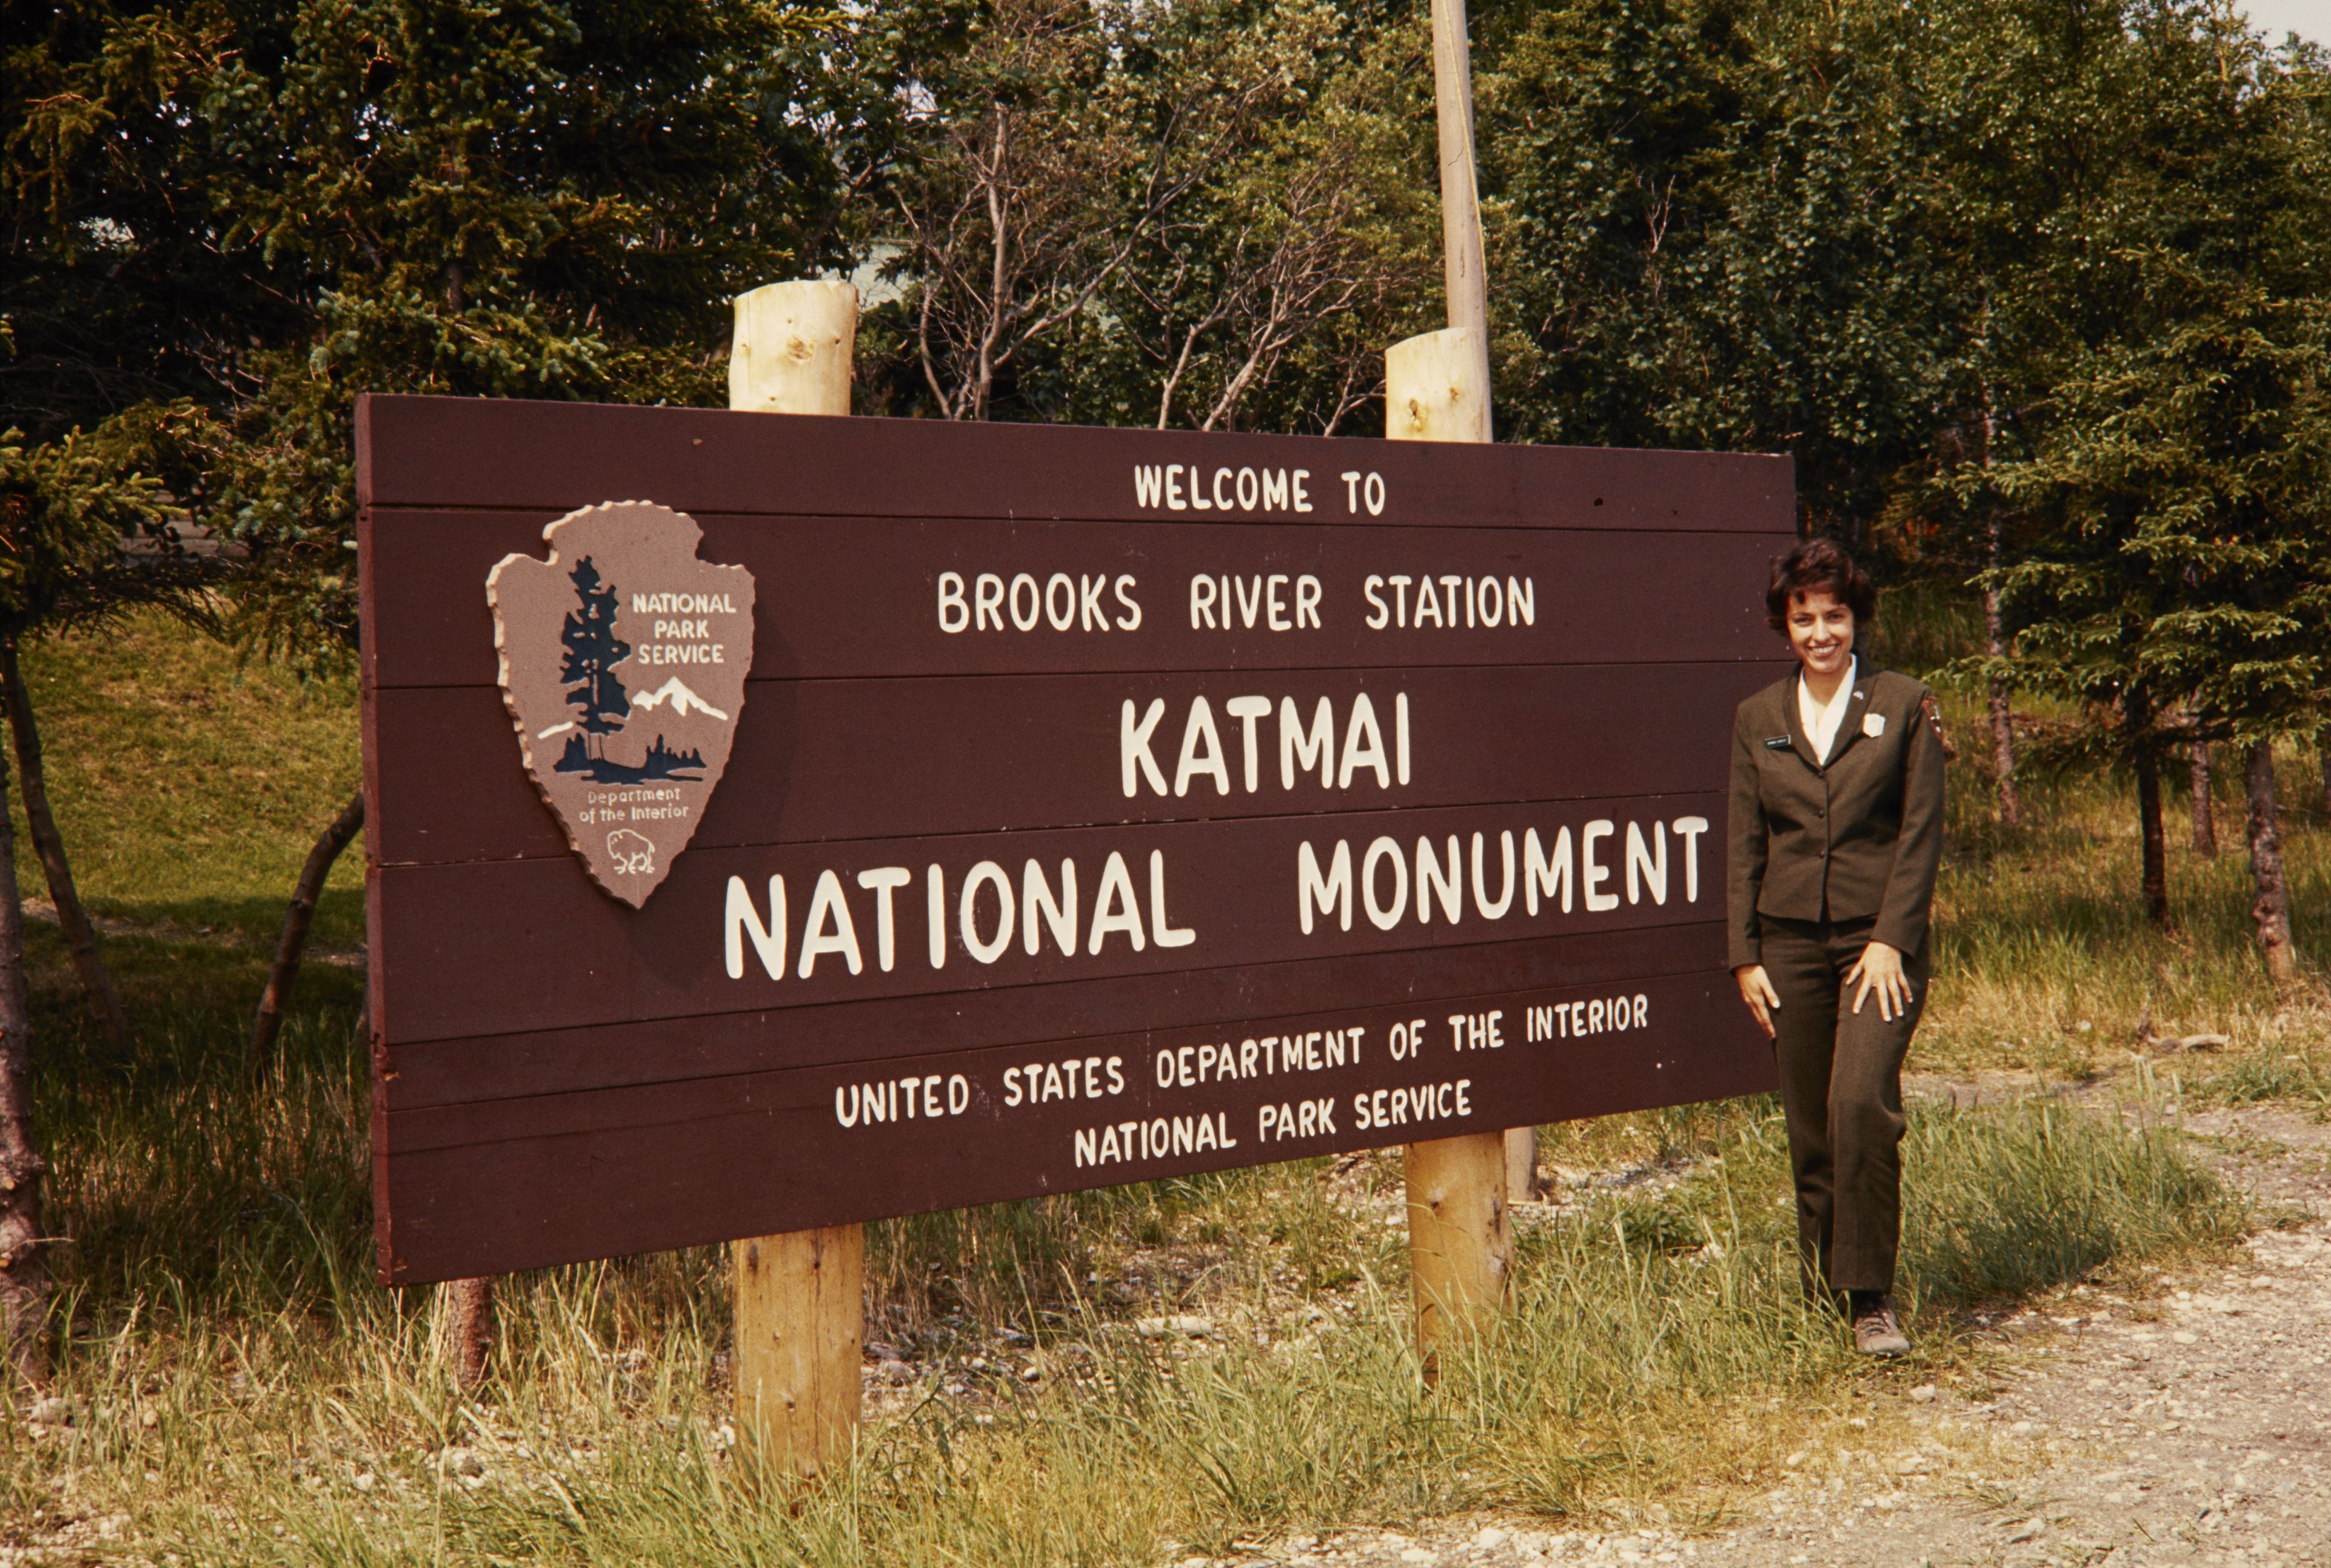 Bonnie Koploy in her NPS uniform stands by the sign for Katmai National Monument.